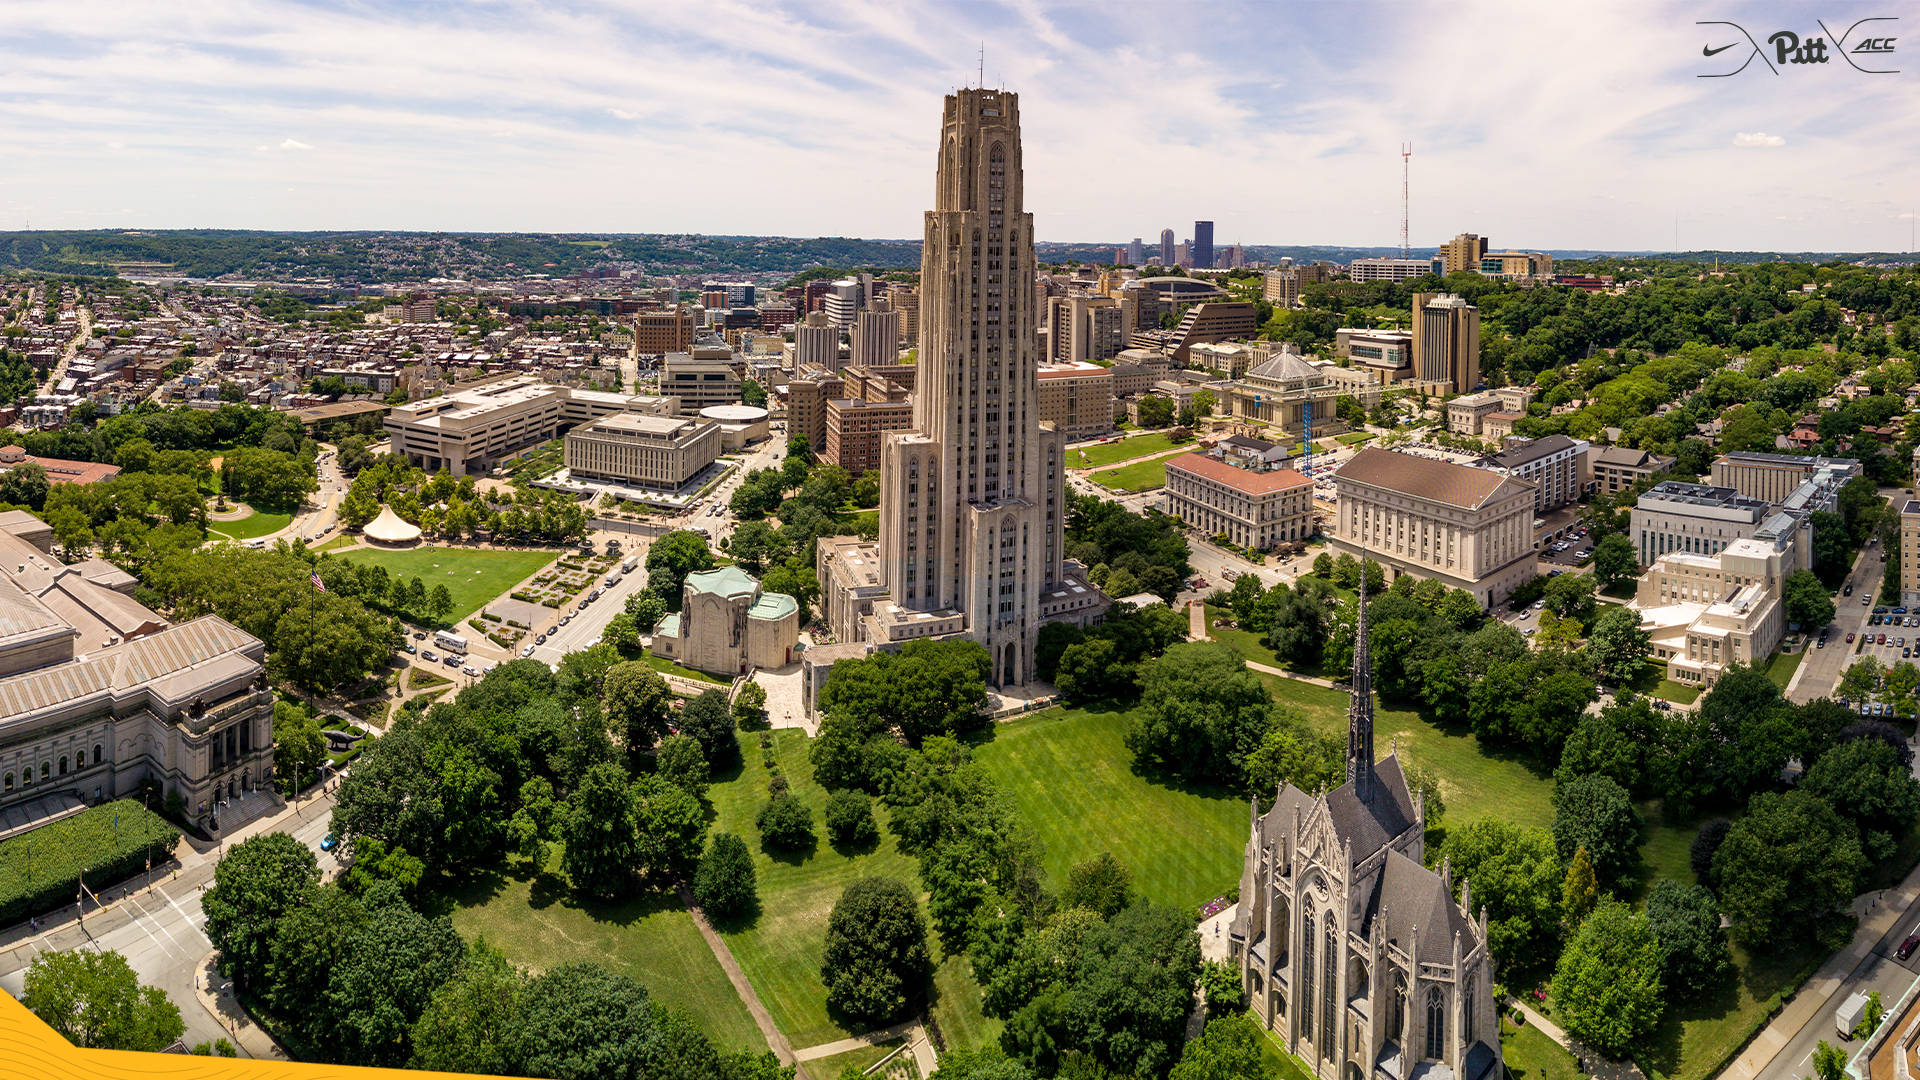 University Of Pittsburgh Aerial View Picture